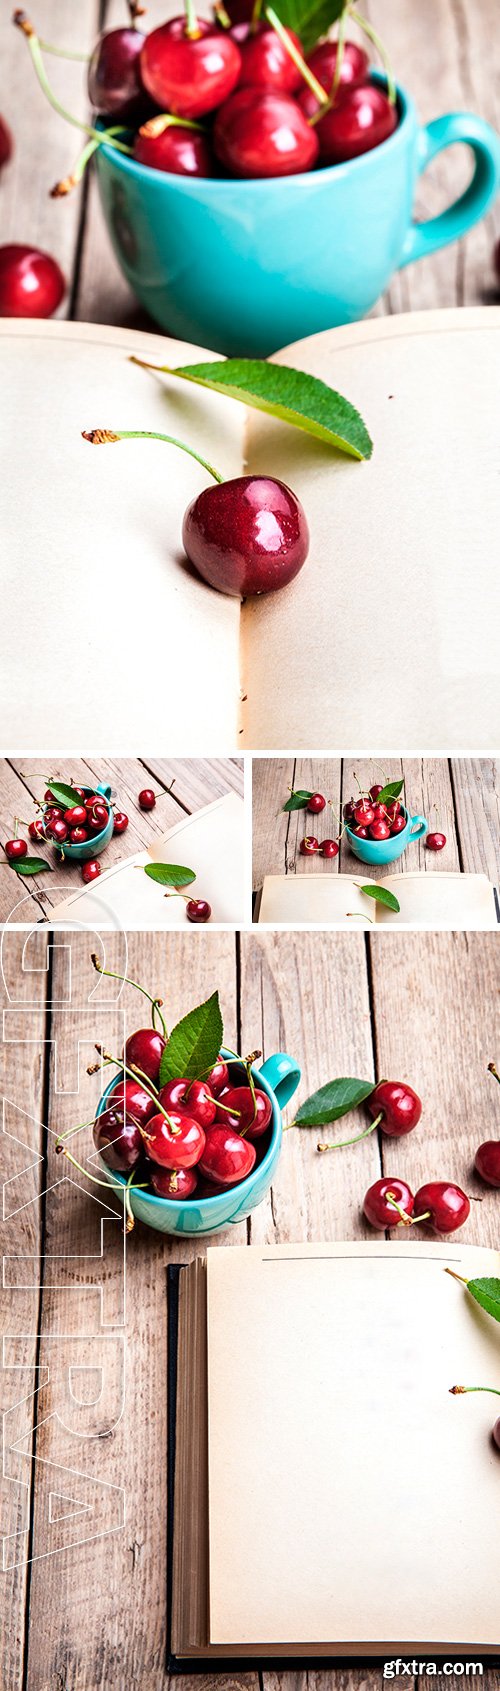 Stock Photos - Cherry in the beautiful turquoise cup and old book on a wooden table. Fruit, education